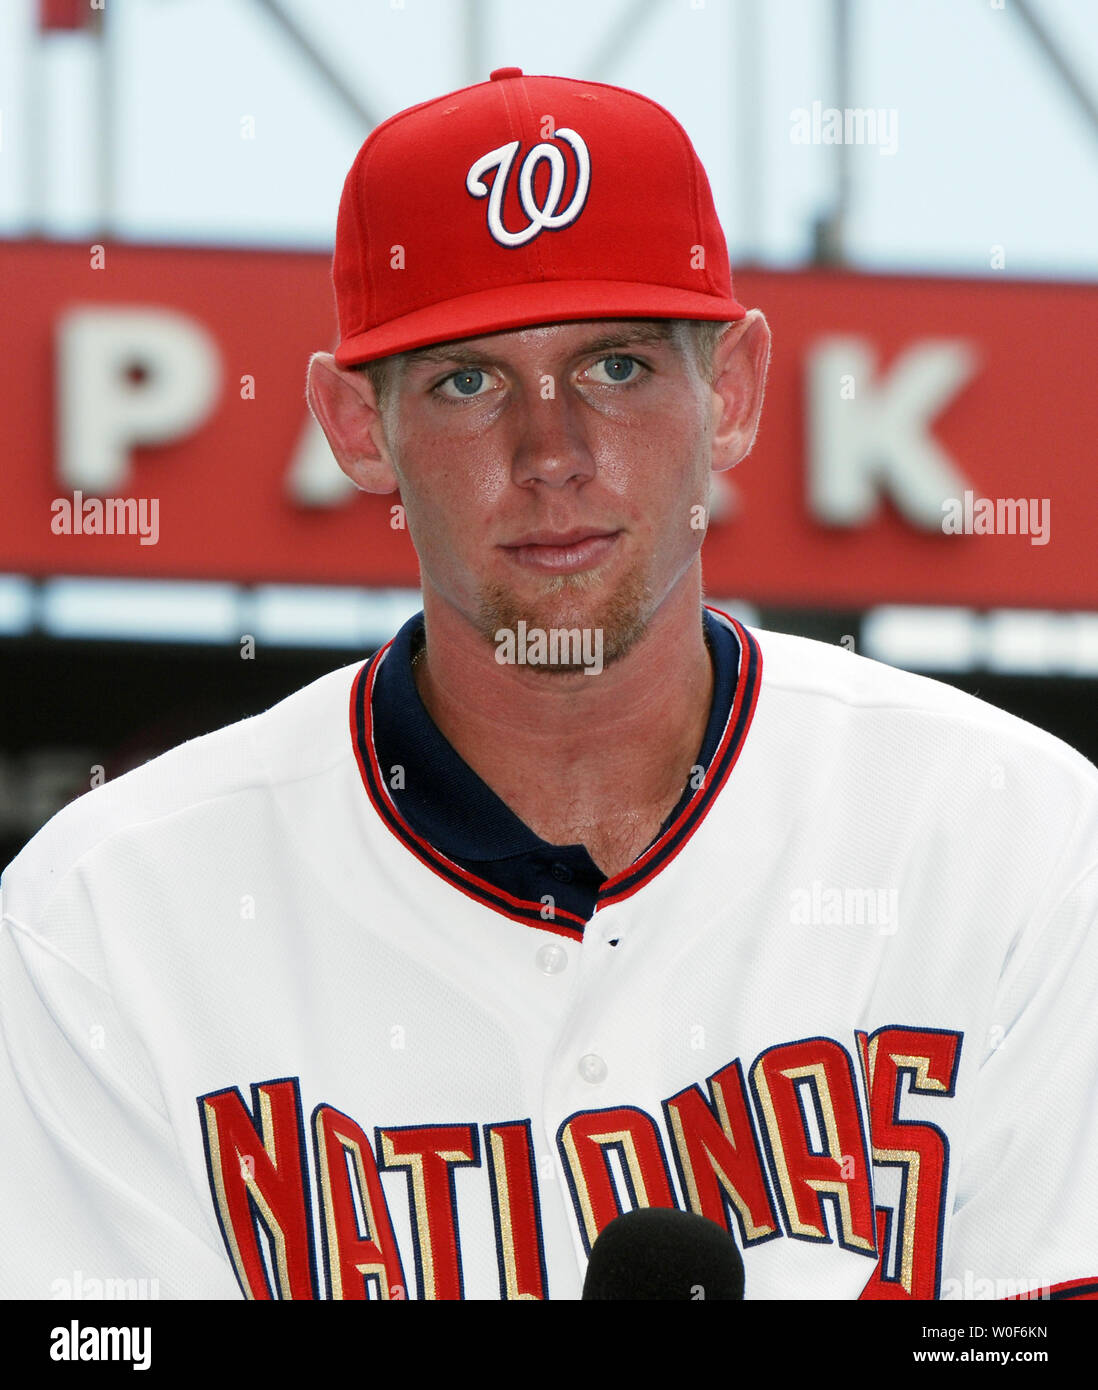 Stephen Strasburg, the top selection in the 2009 First Year Player Draft,  is introduced by General Manager Mike Rizzo as the newest member of the  Washington Nationals at Nationals Park in Washington